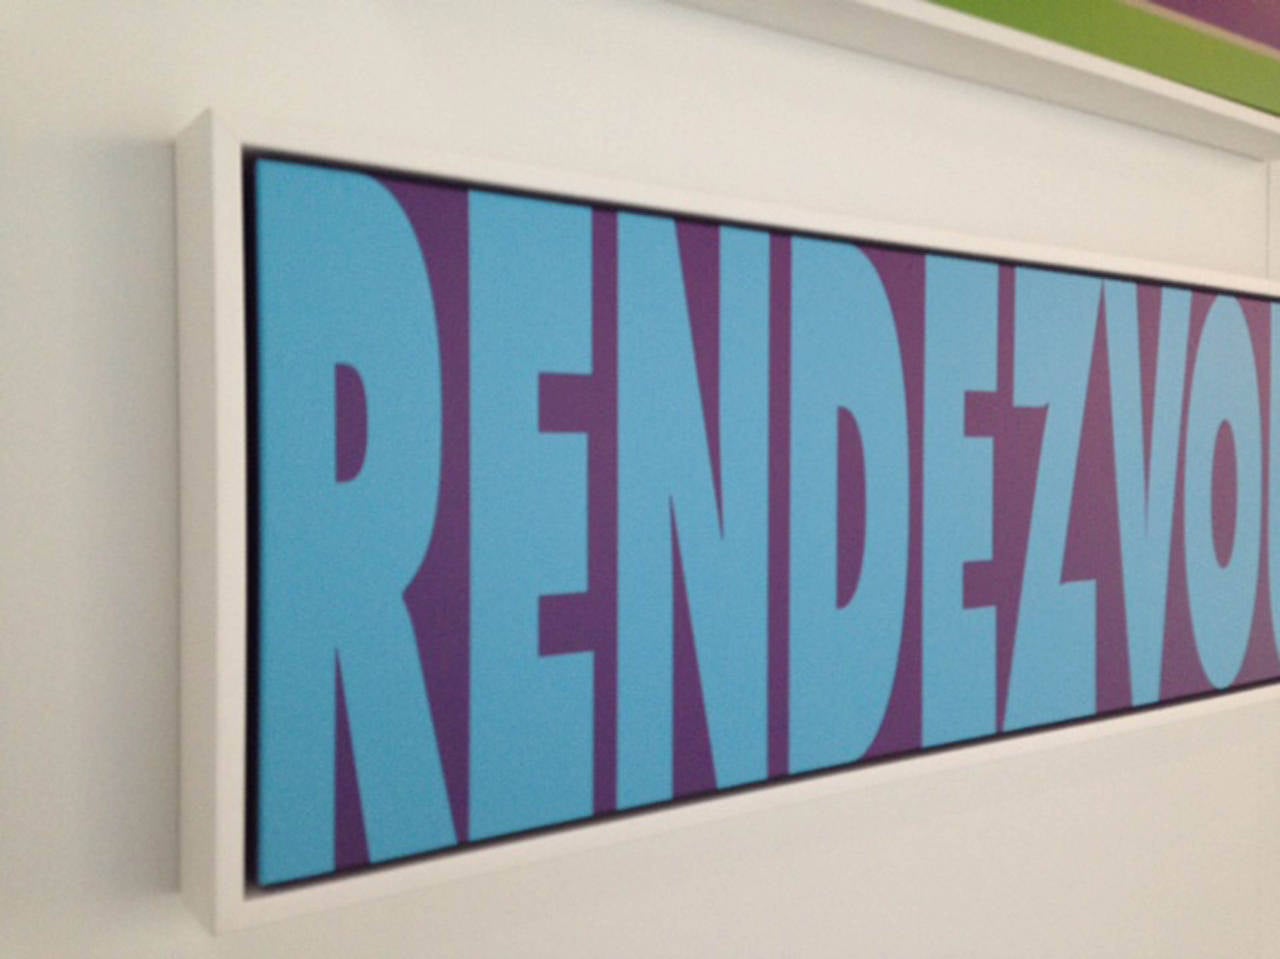 Acrylic & Vinyl on Panel Titled: Rendezvous - Abstract Painting by William Finlayson